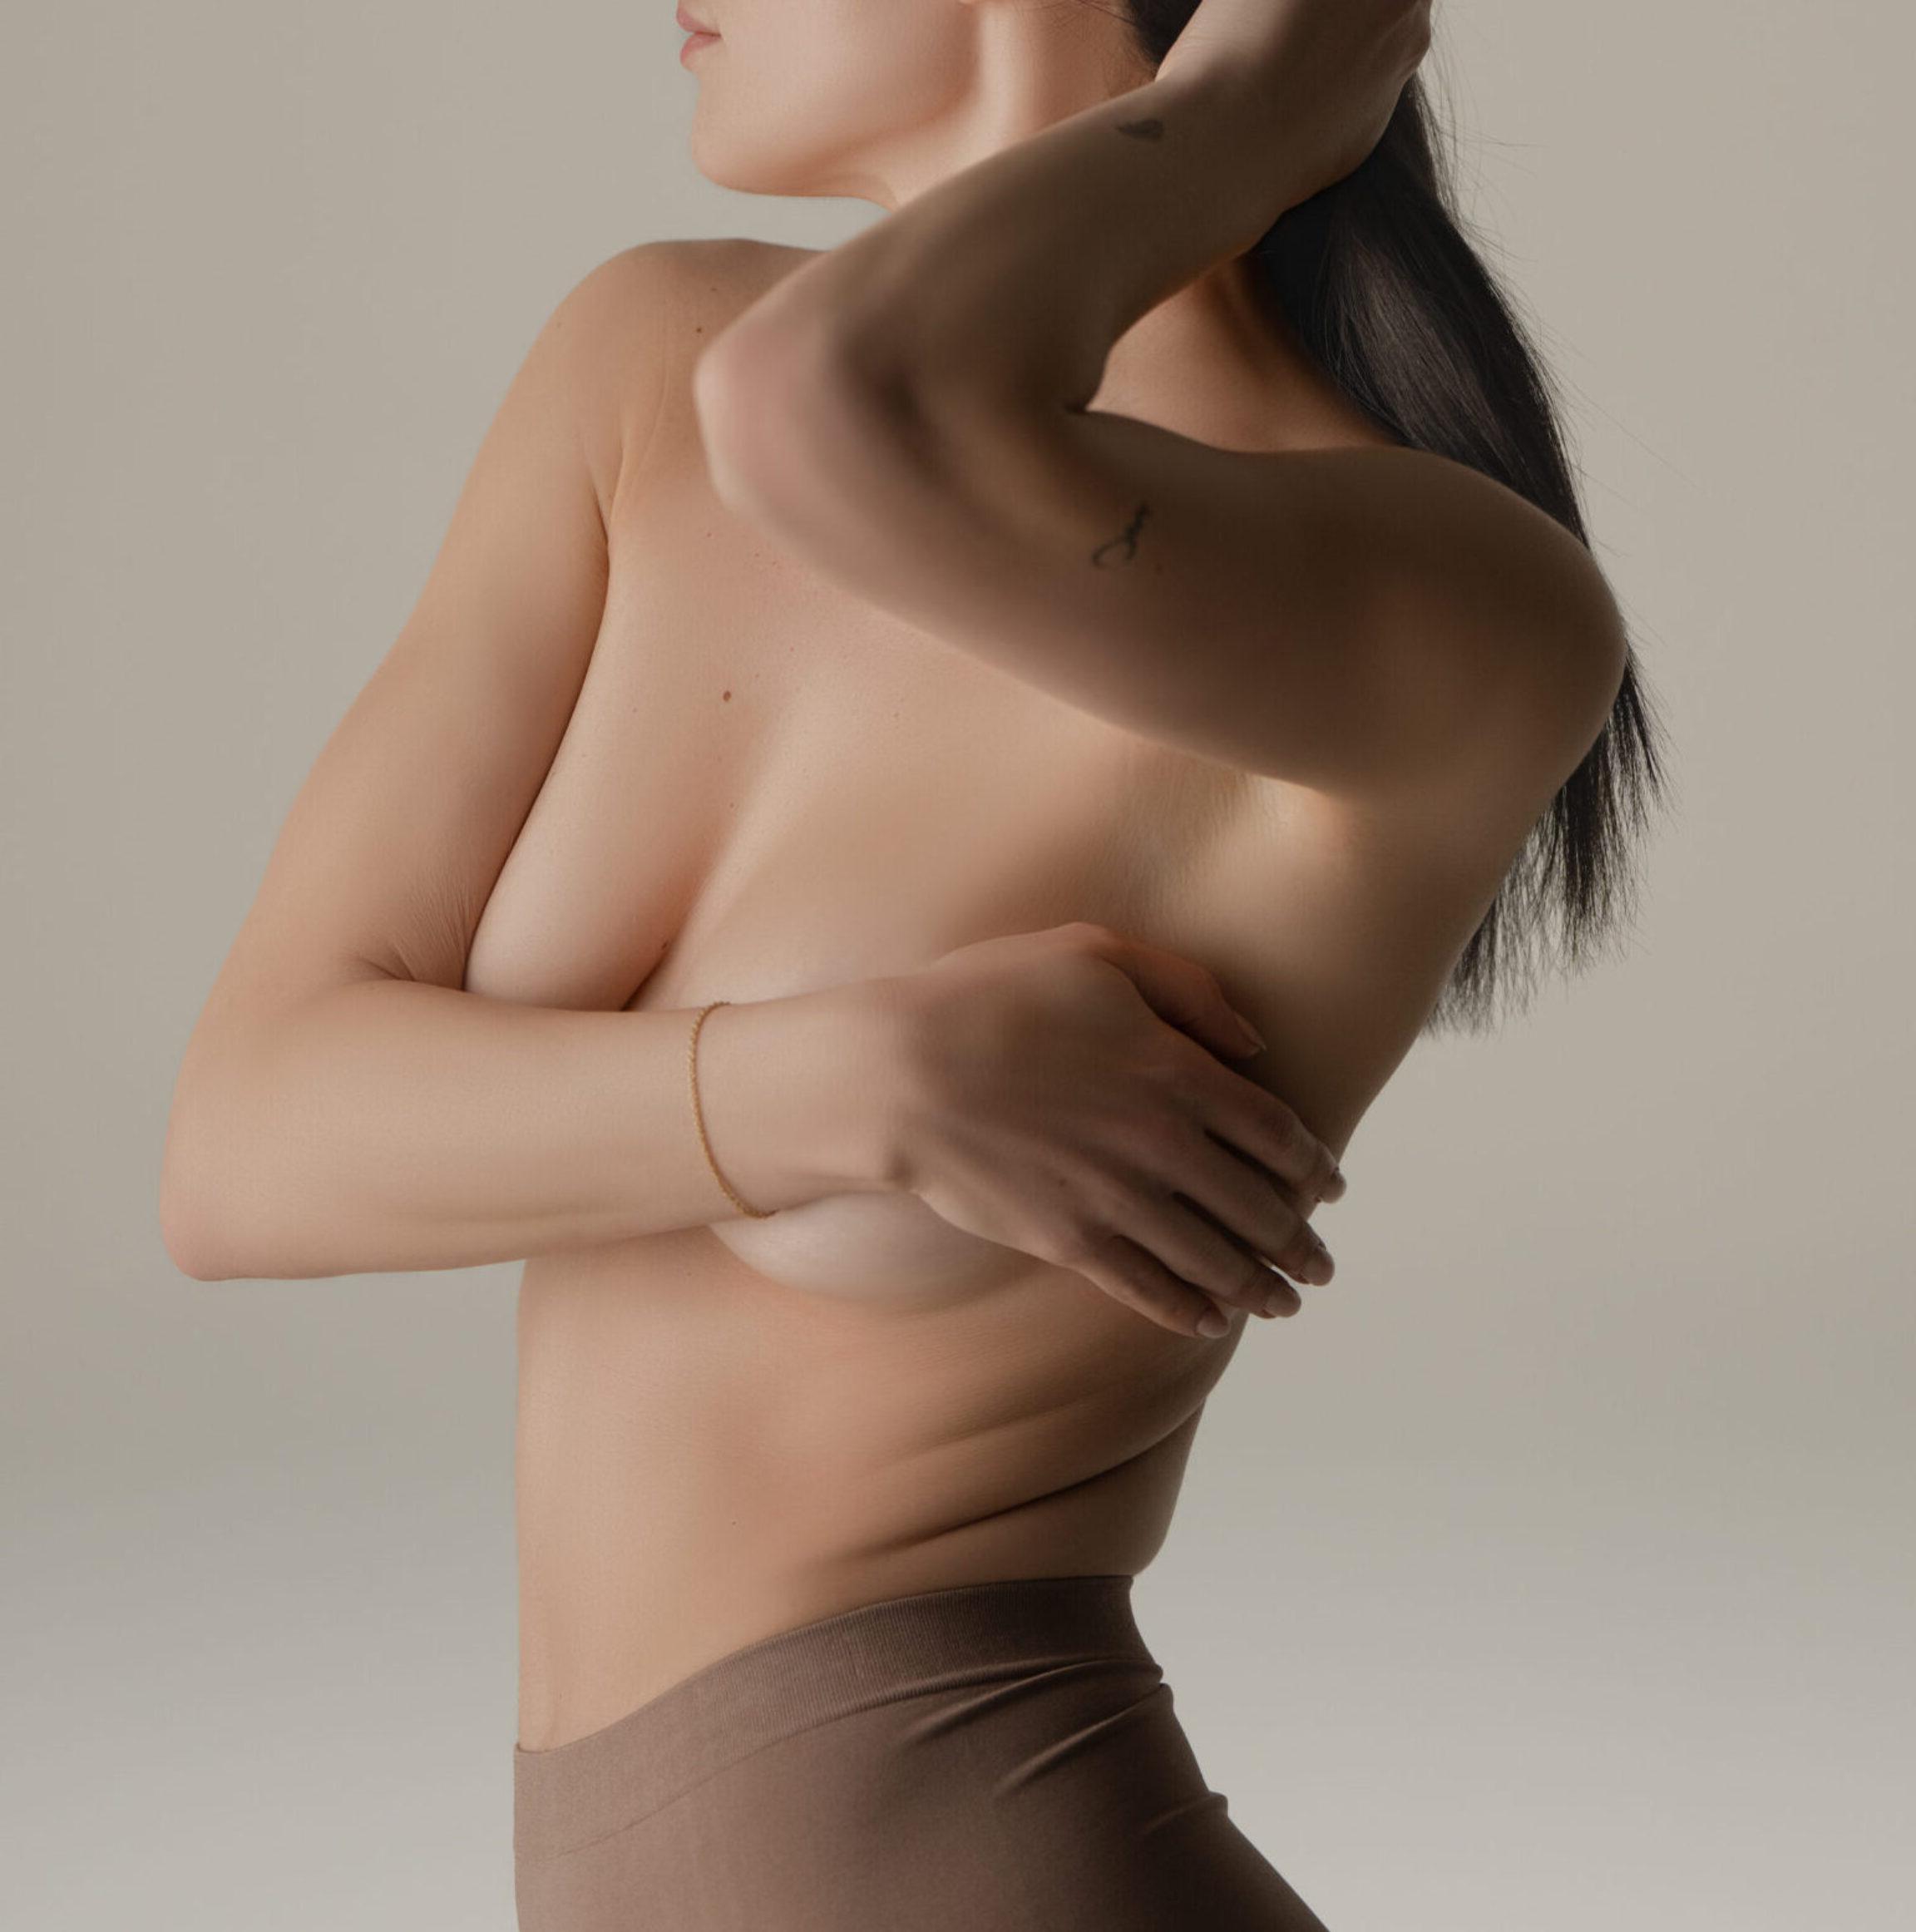 Scarless breast augmentation example